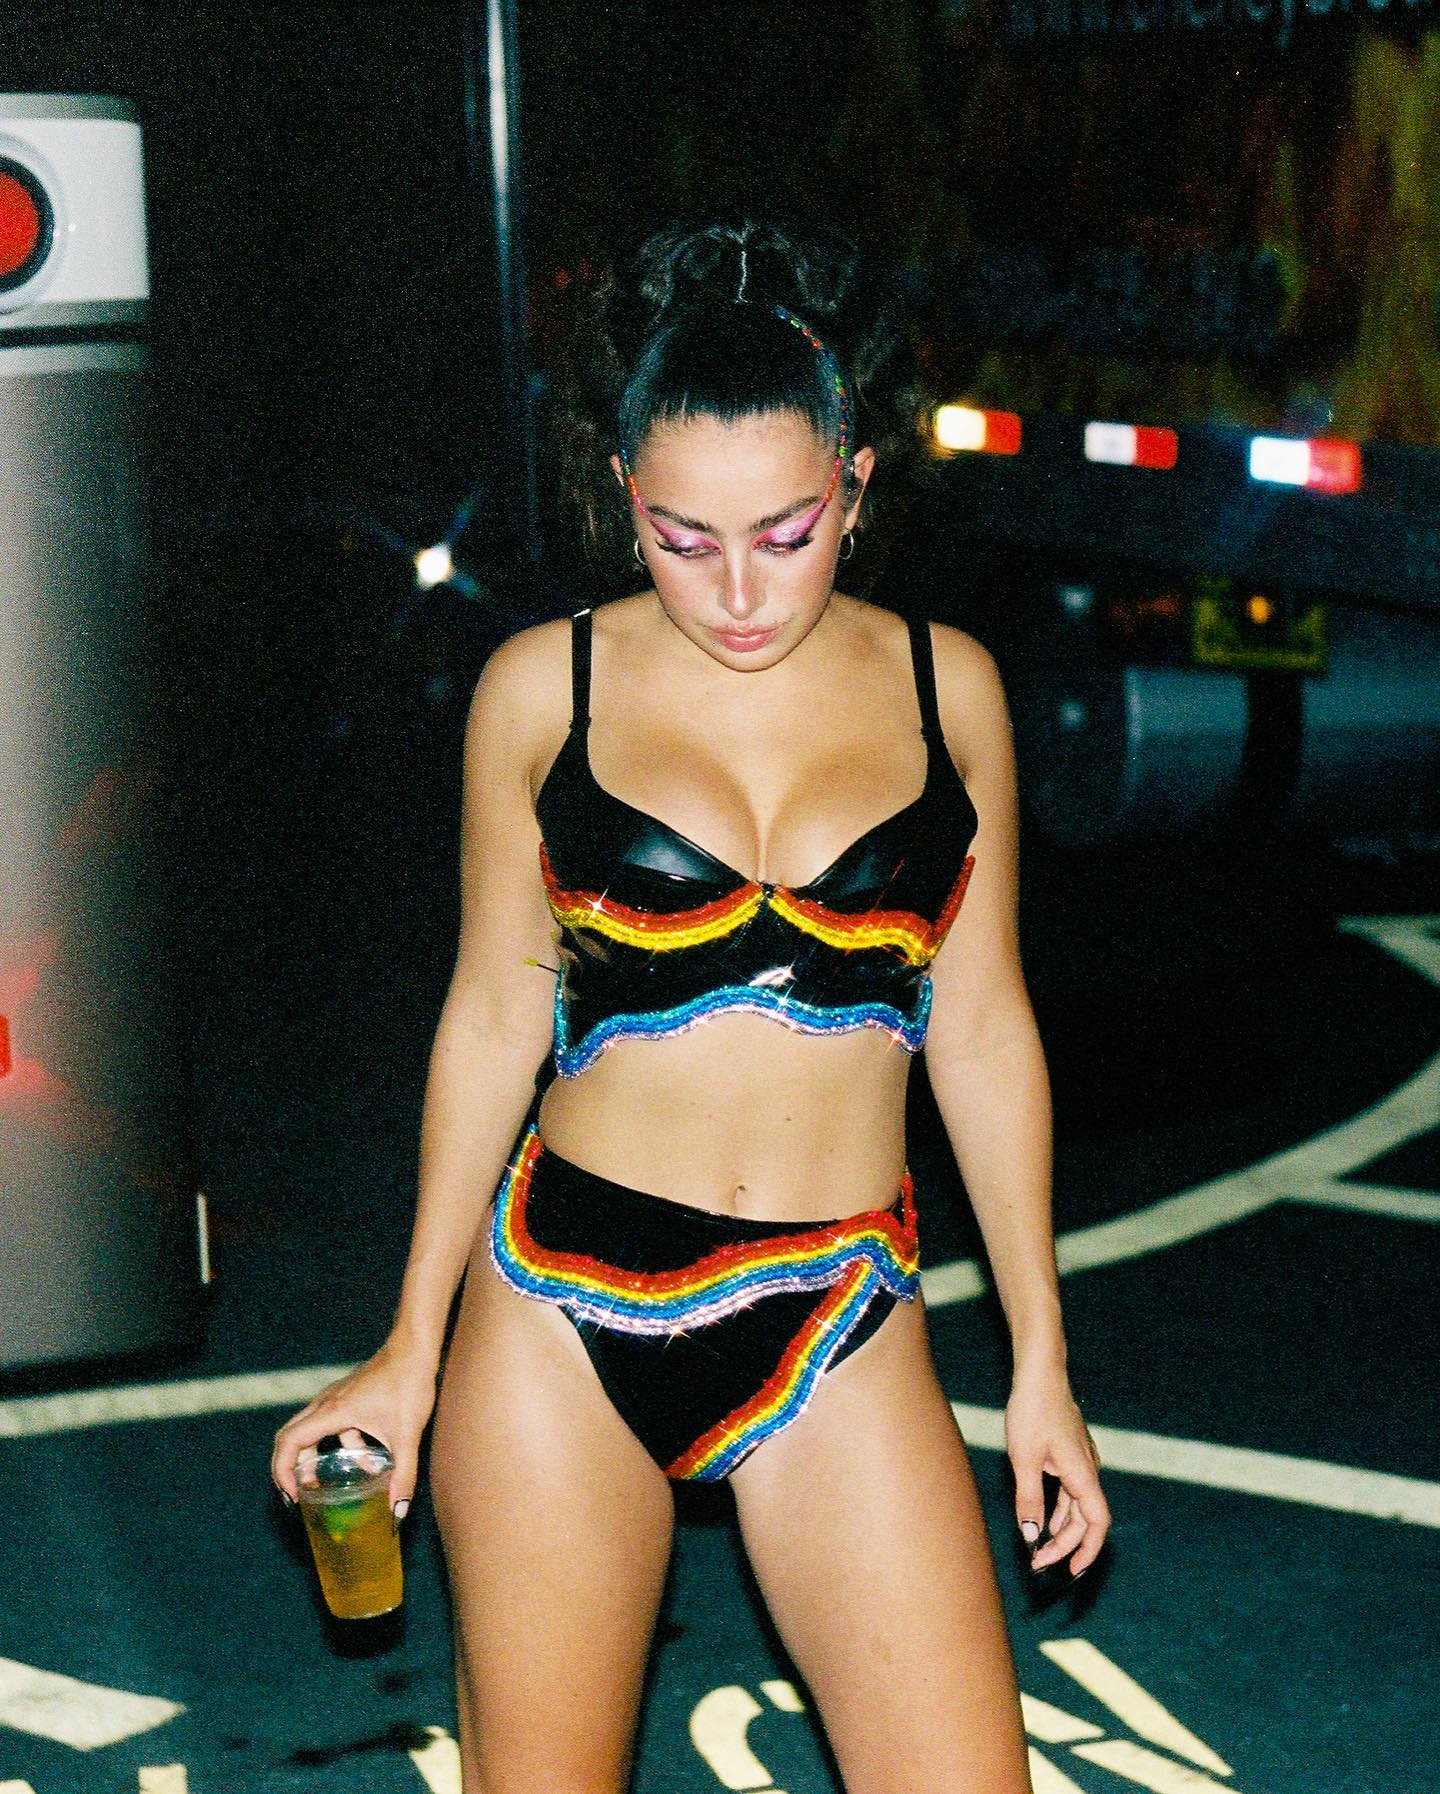 Photos n°51 : Charli XCX Looks Hot In It!